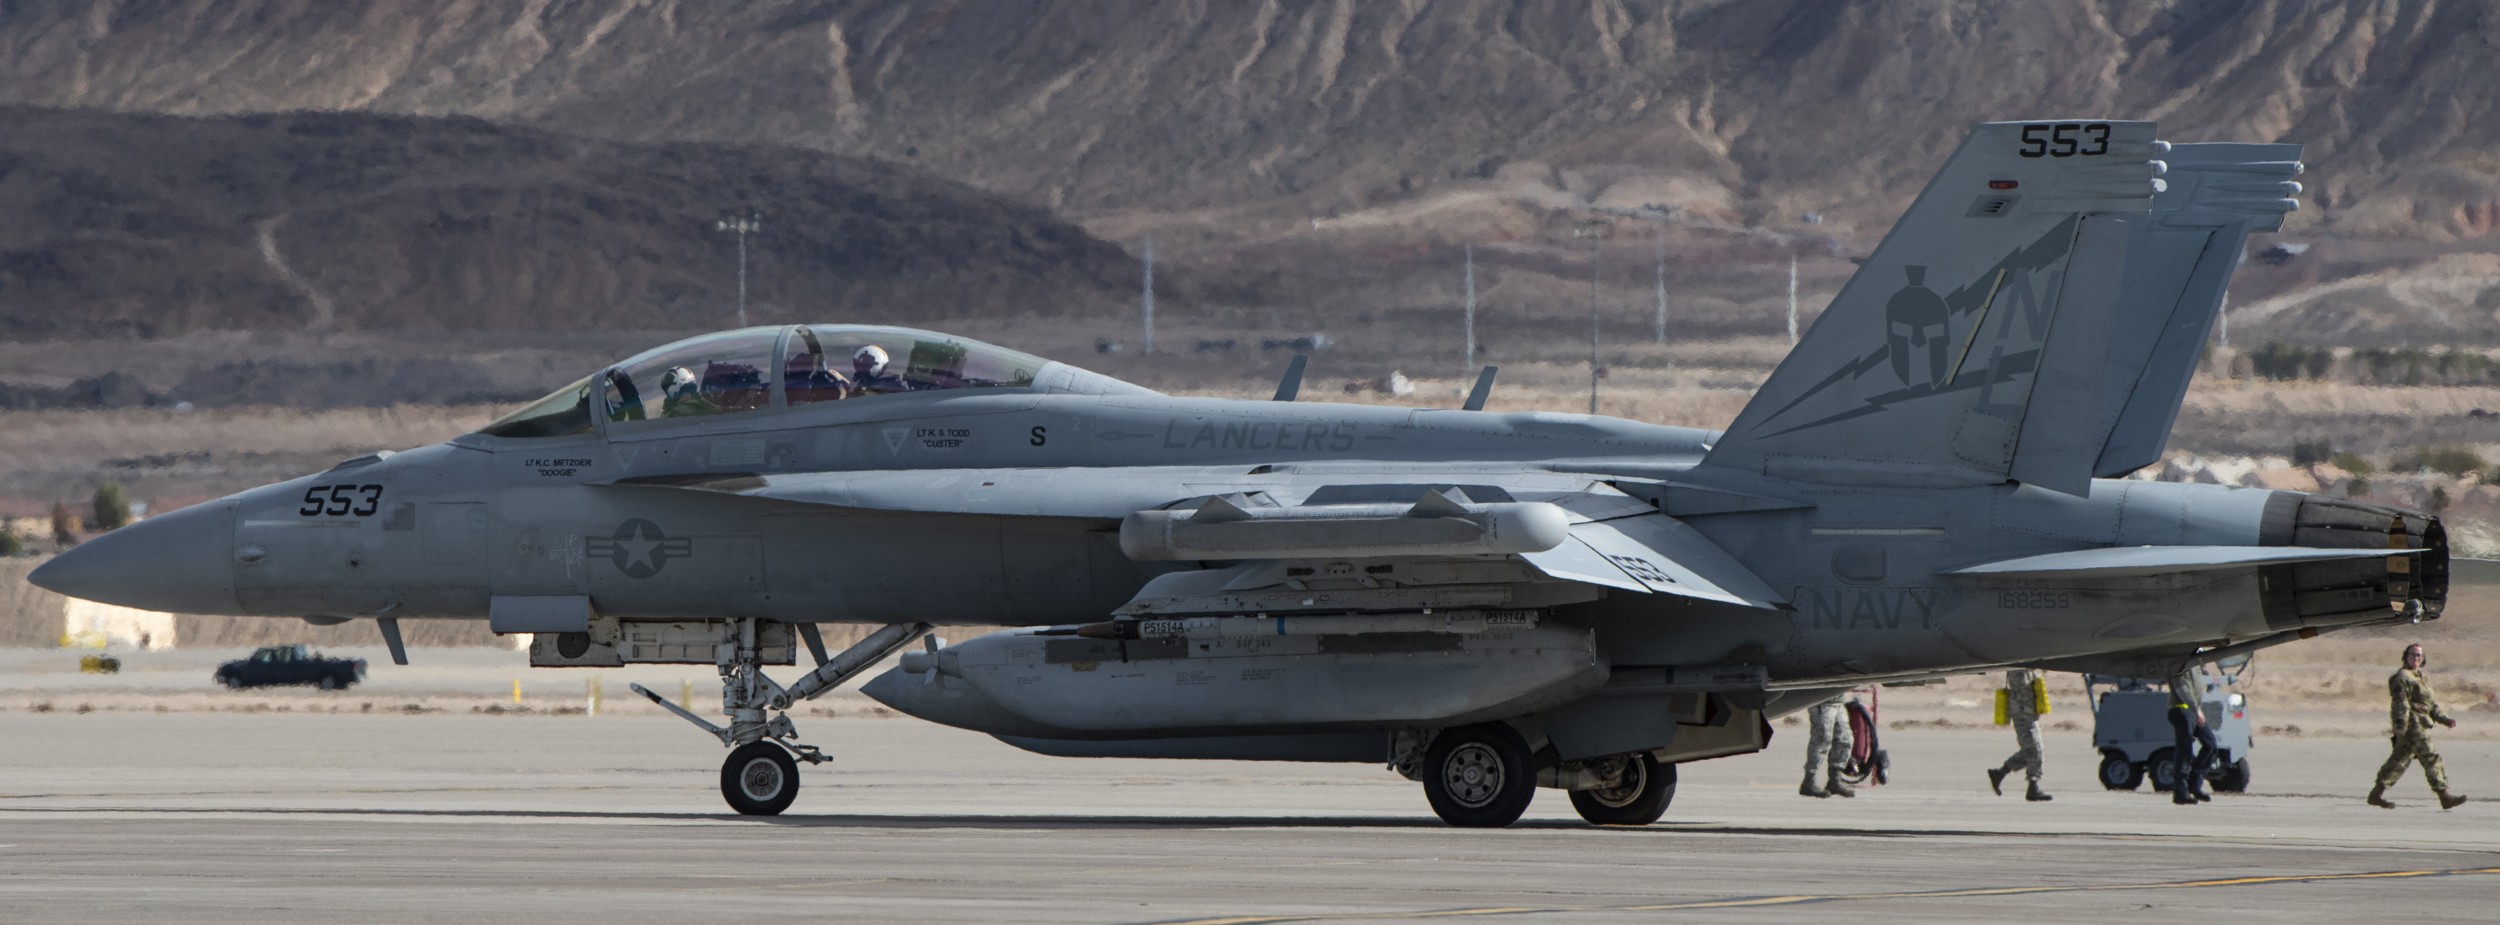 vaq-131 lancers electronic attack squadron vaqron us navy boeing ea-18g growler nellis afb nevada red flag exercise 84